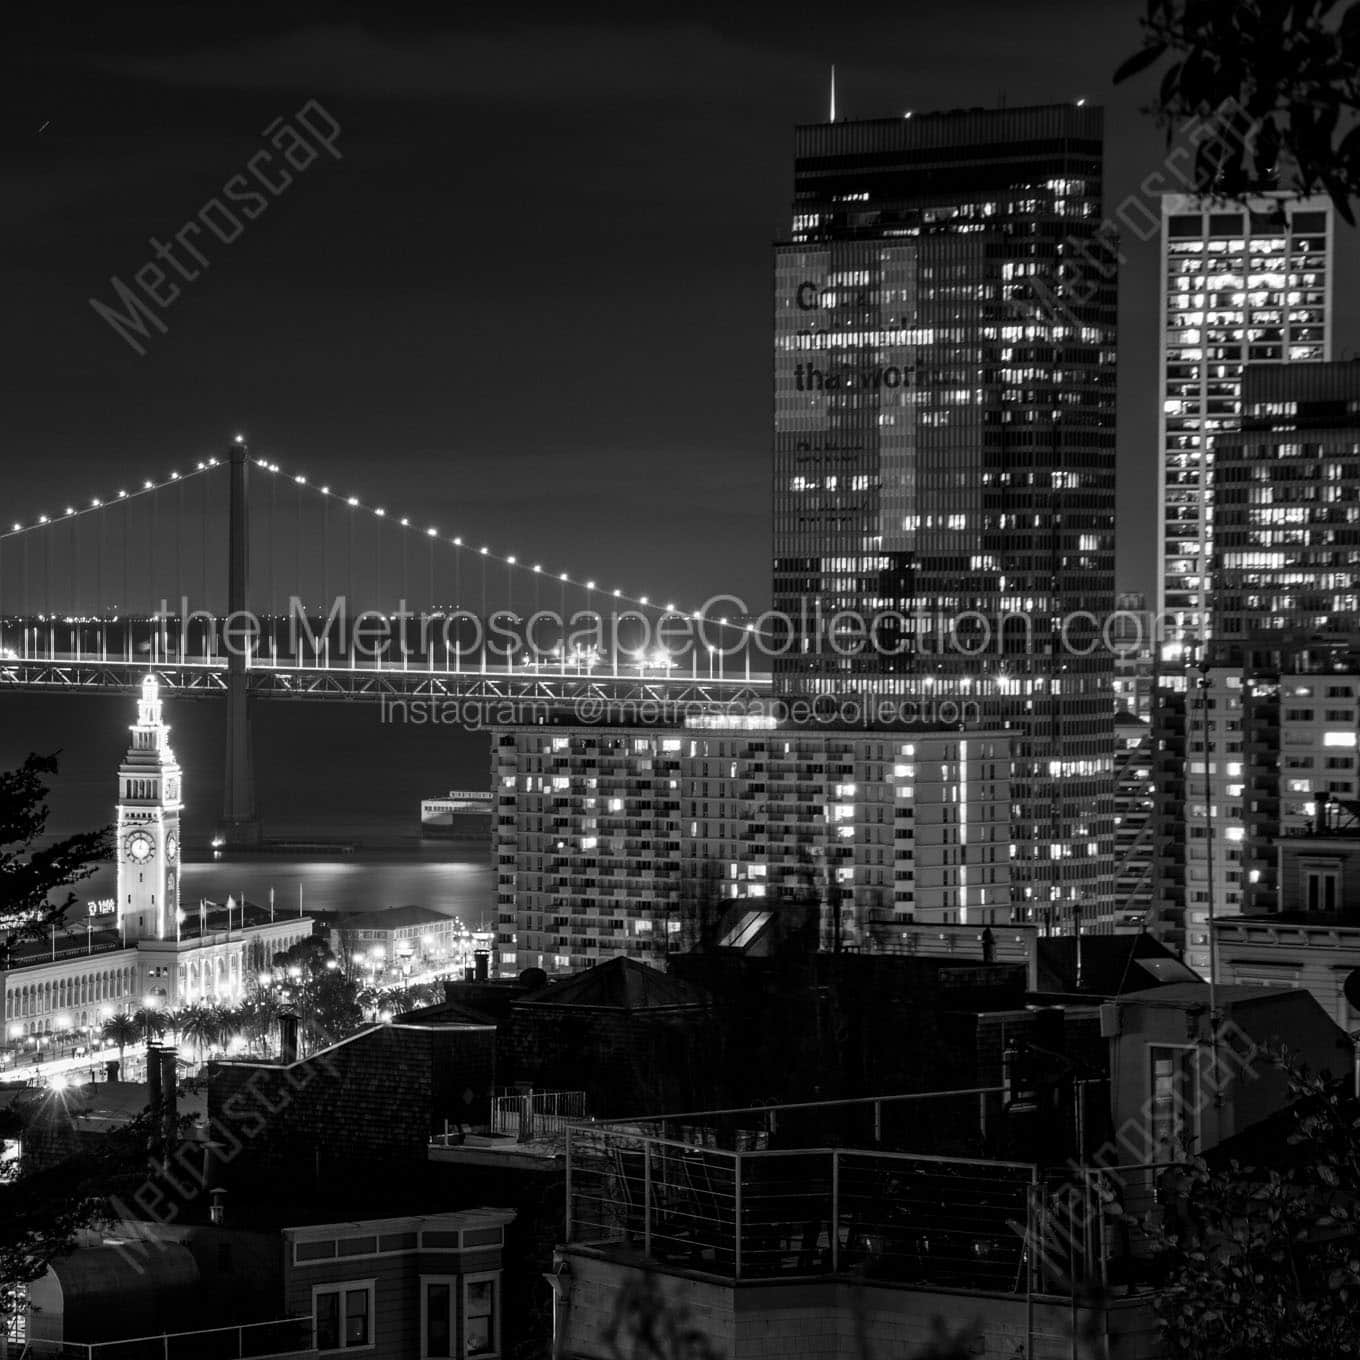 ferry building from telegraph hill Black & White Office Art